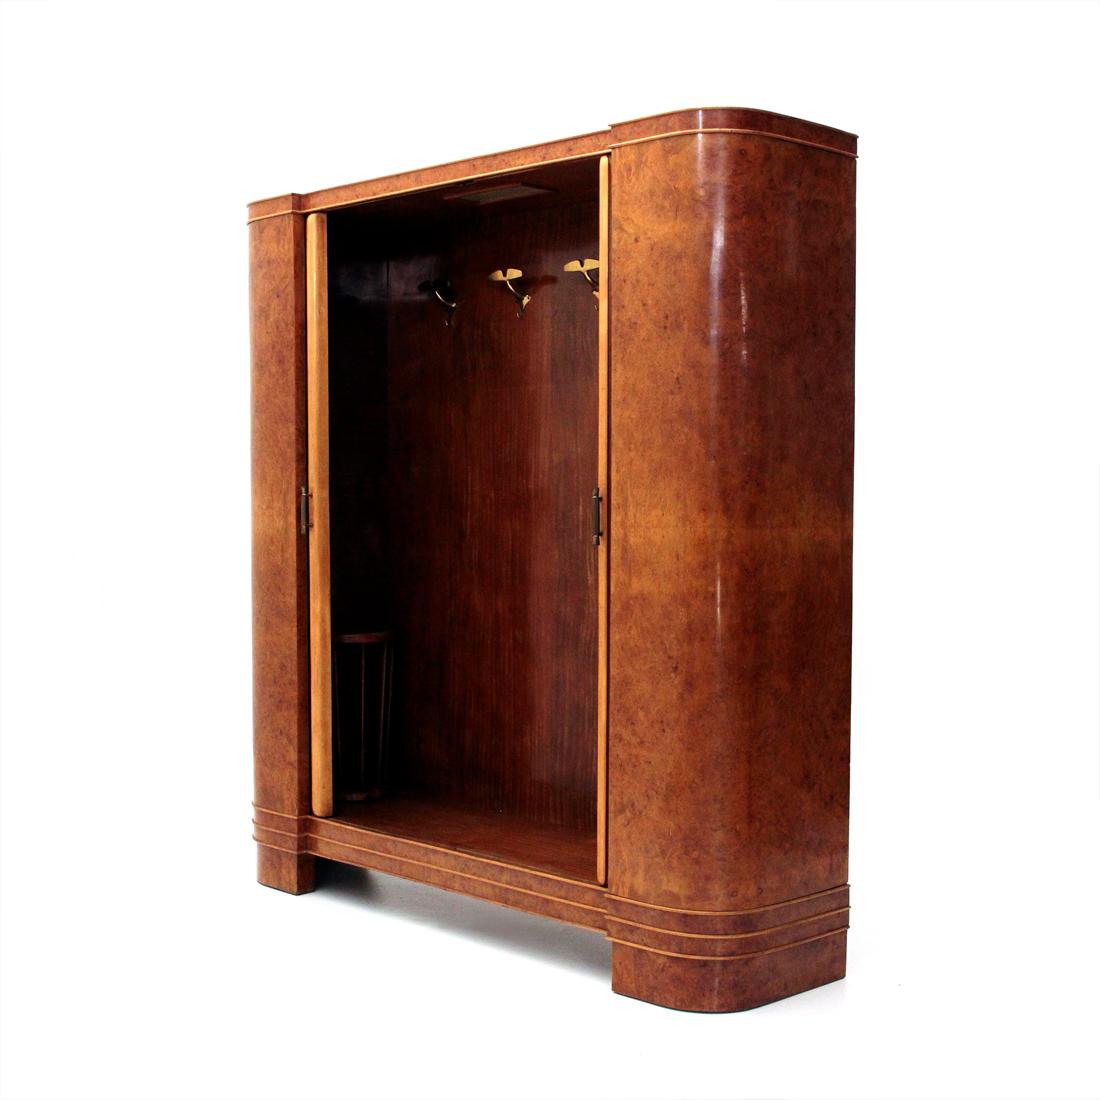 Entrance wardrobe, coat hanger of Italian manufacture produced in the 1940s.
Wooden structure veneered in briarwood.
Sliding doors made of wooden strips and decorated mirrors, brass handles.
Wood veneer interiors, brass hangers and wooden